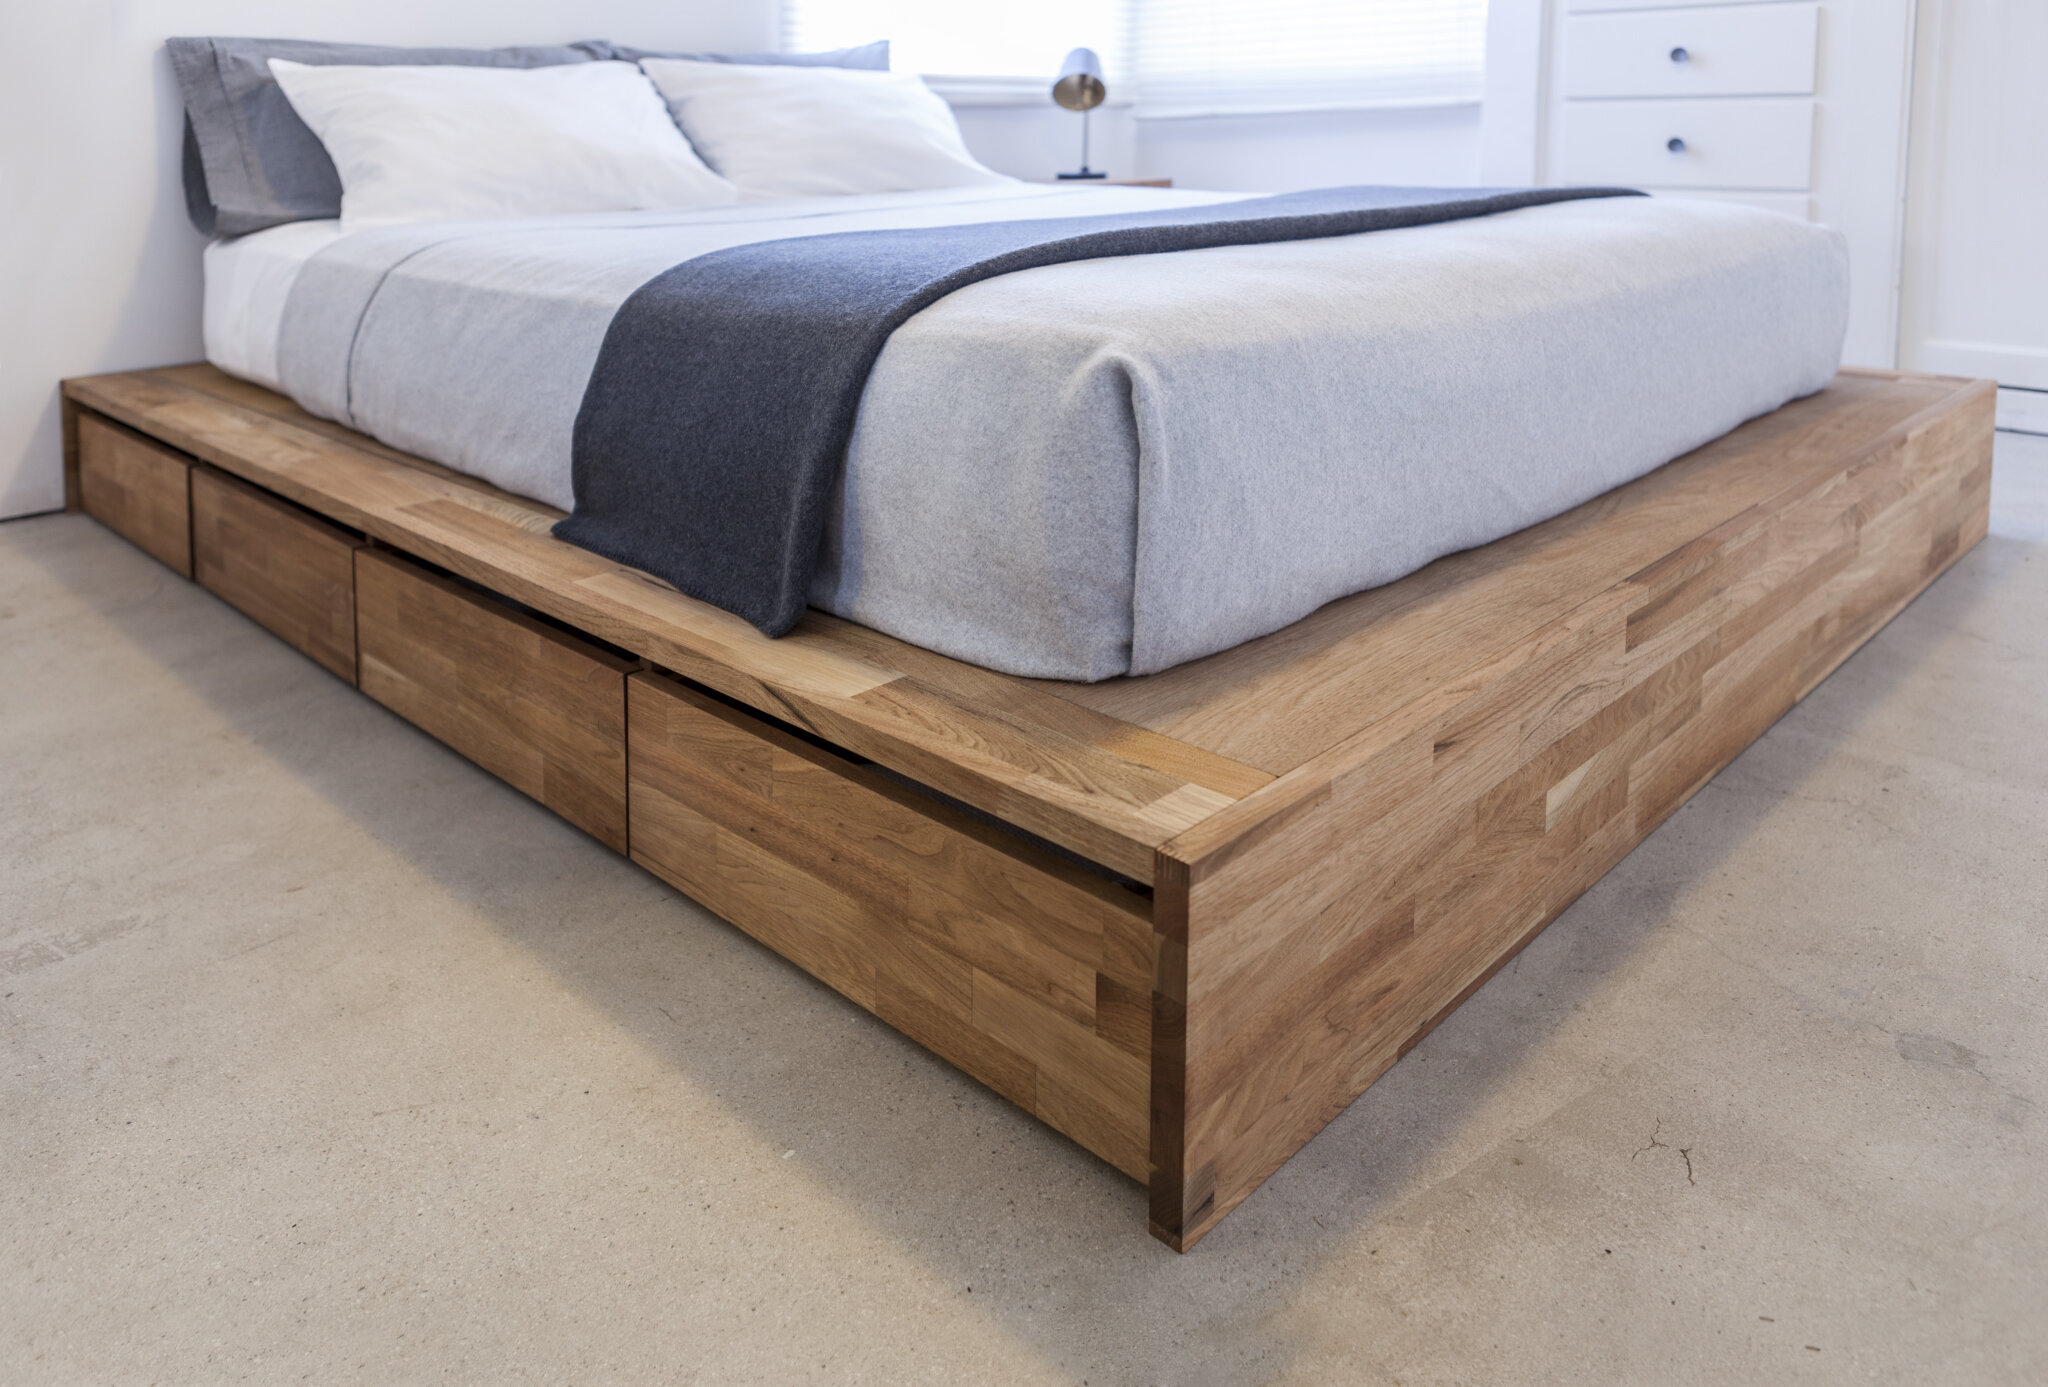 Bed With Drawers Underneath Visualhunt, How To Build A King Platform Bed With Storage Drawers